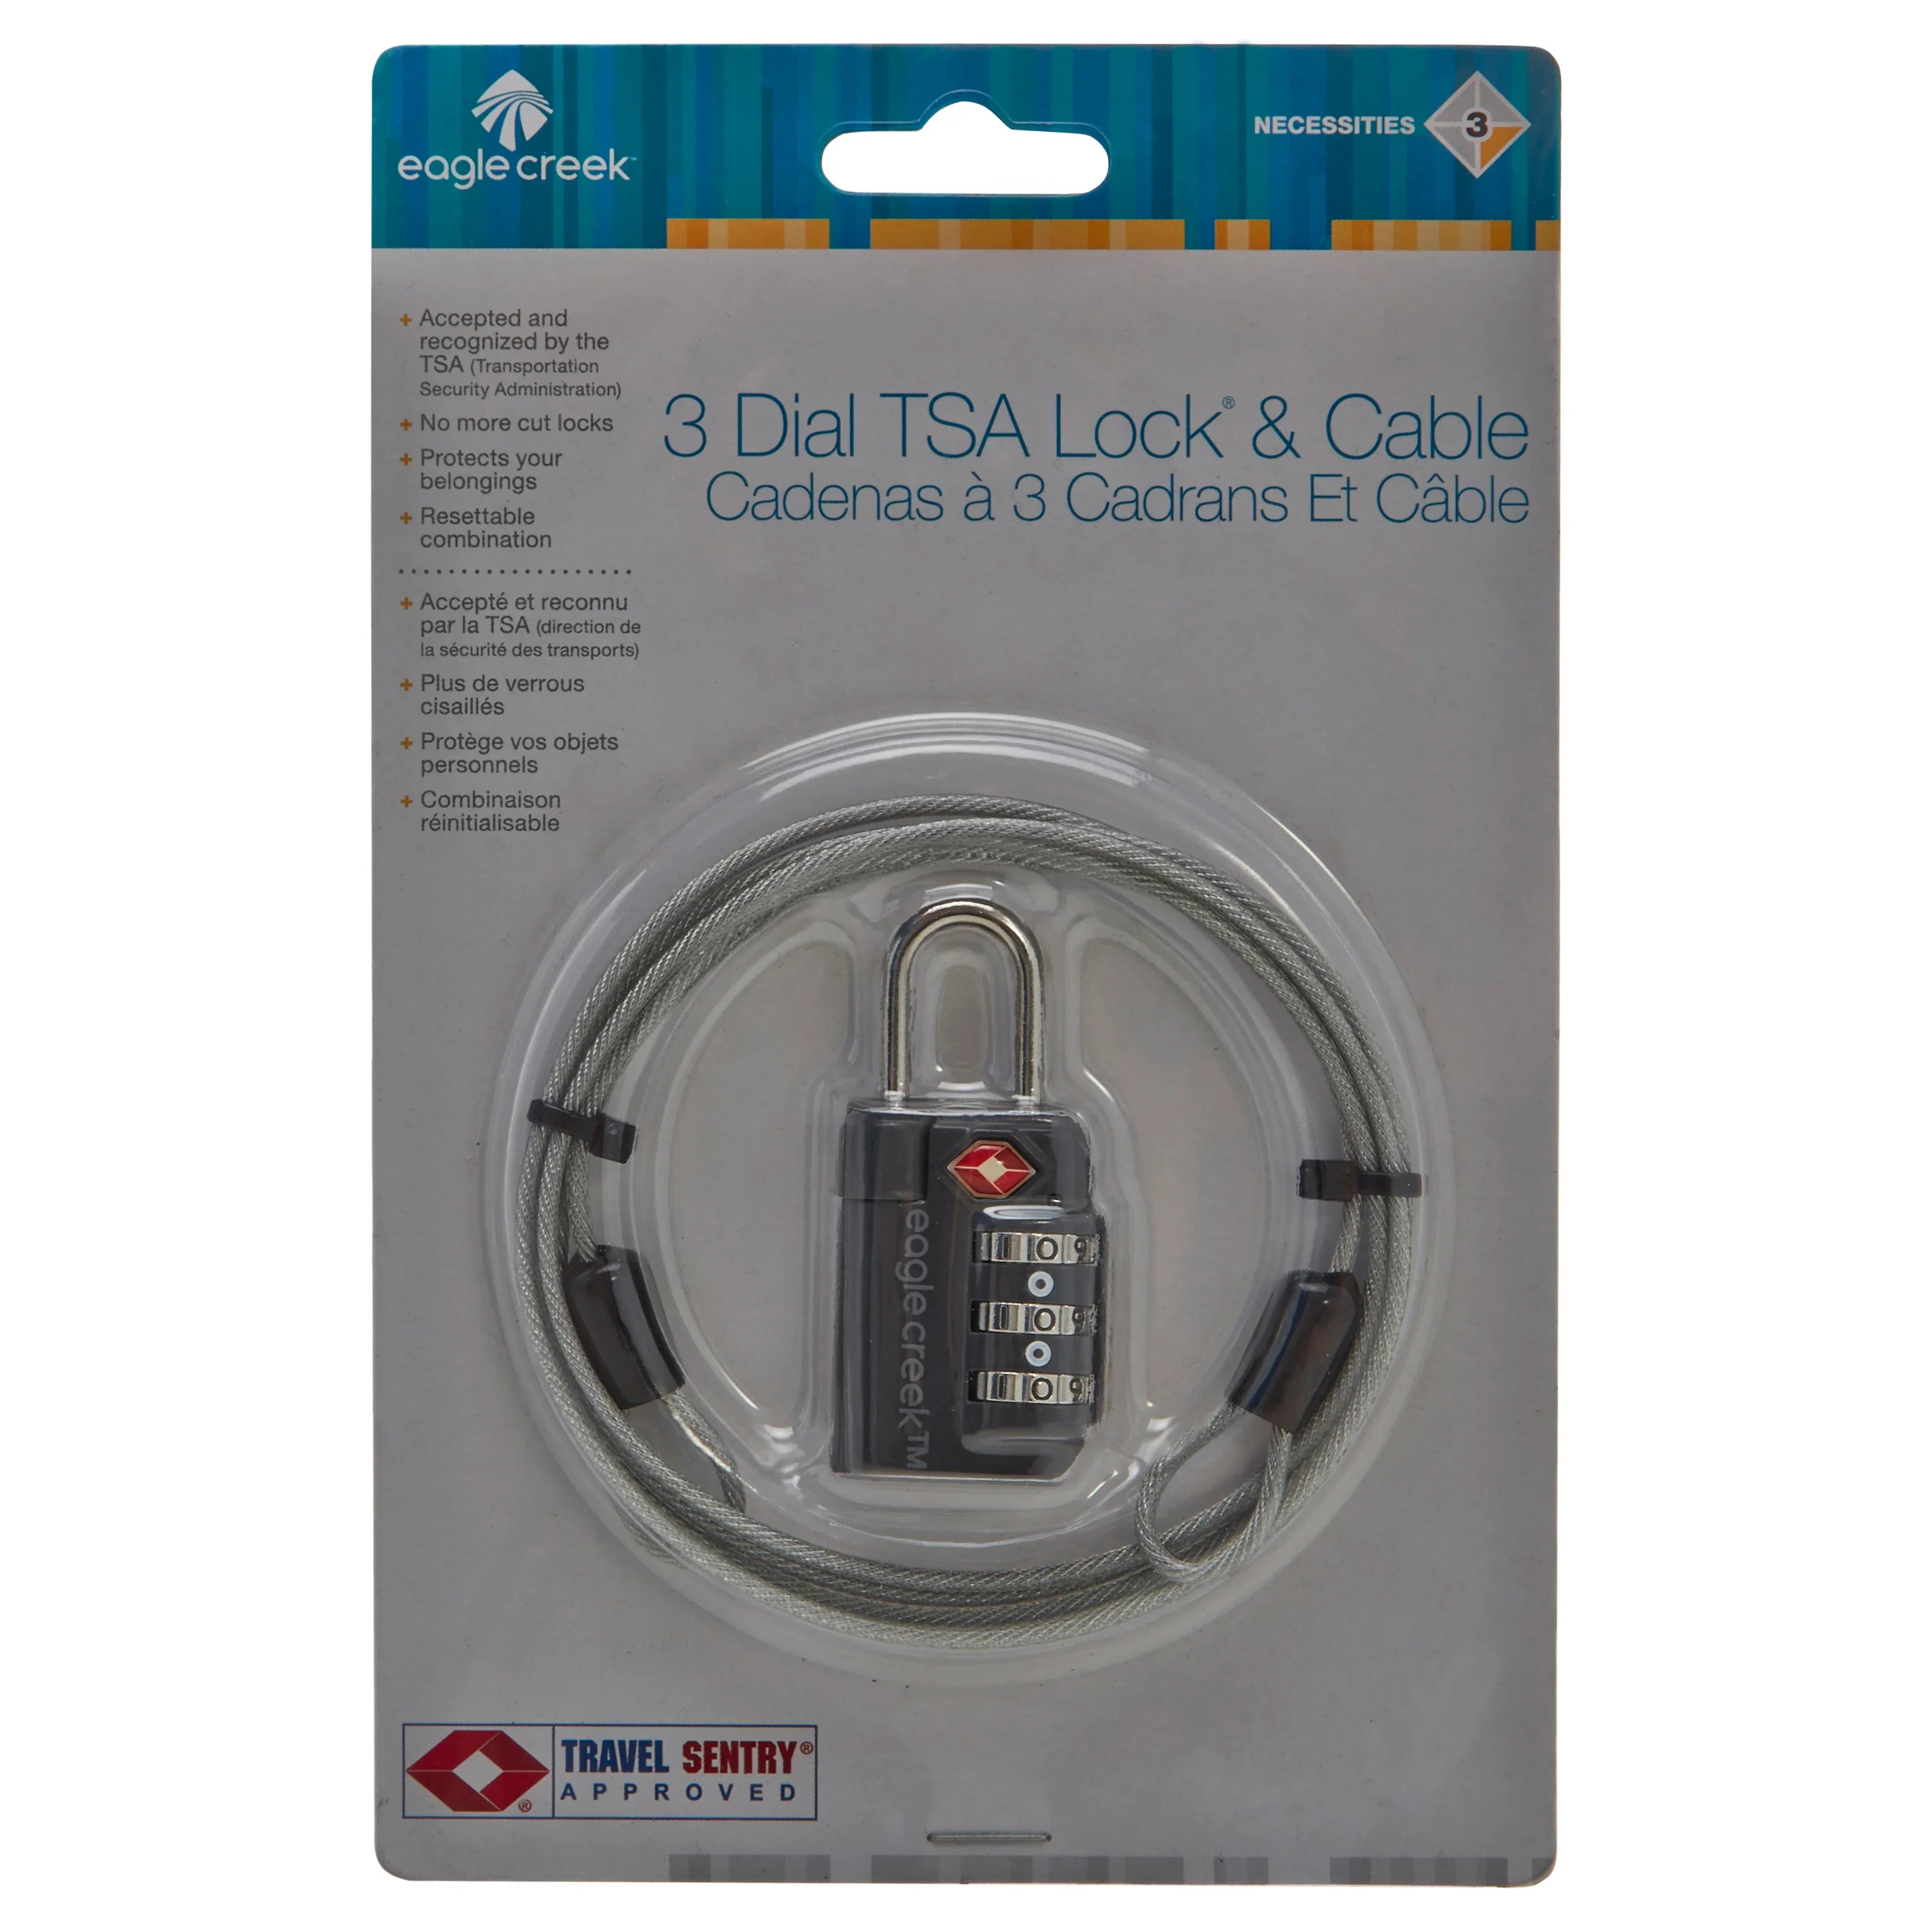 Eagle Creek Necessities Security 3-Dial TSA Lock and Cable 6 cm - graphite